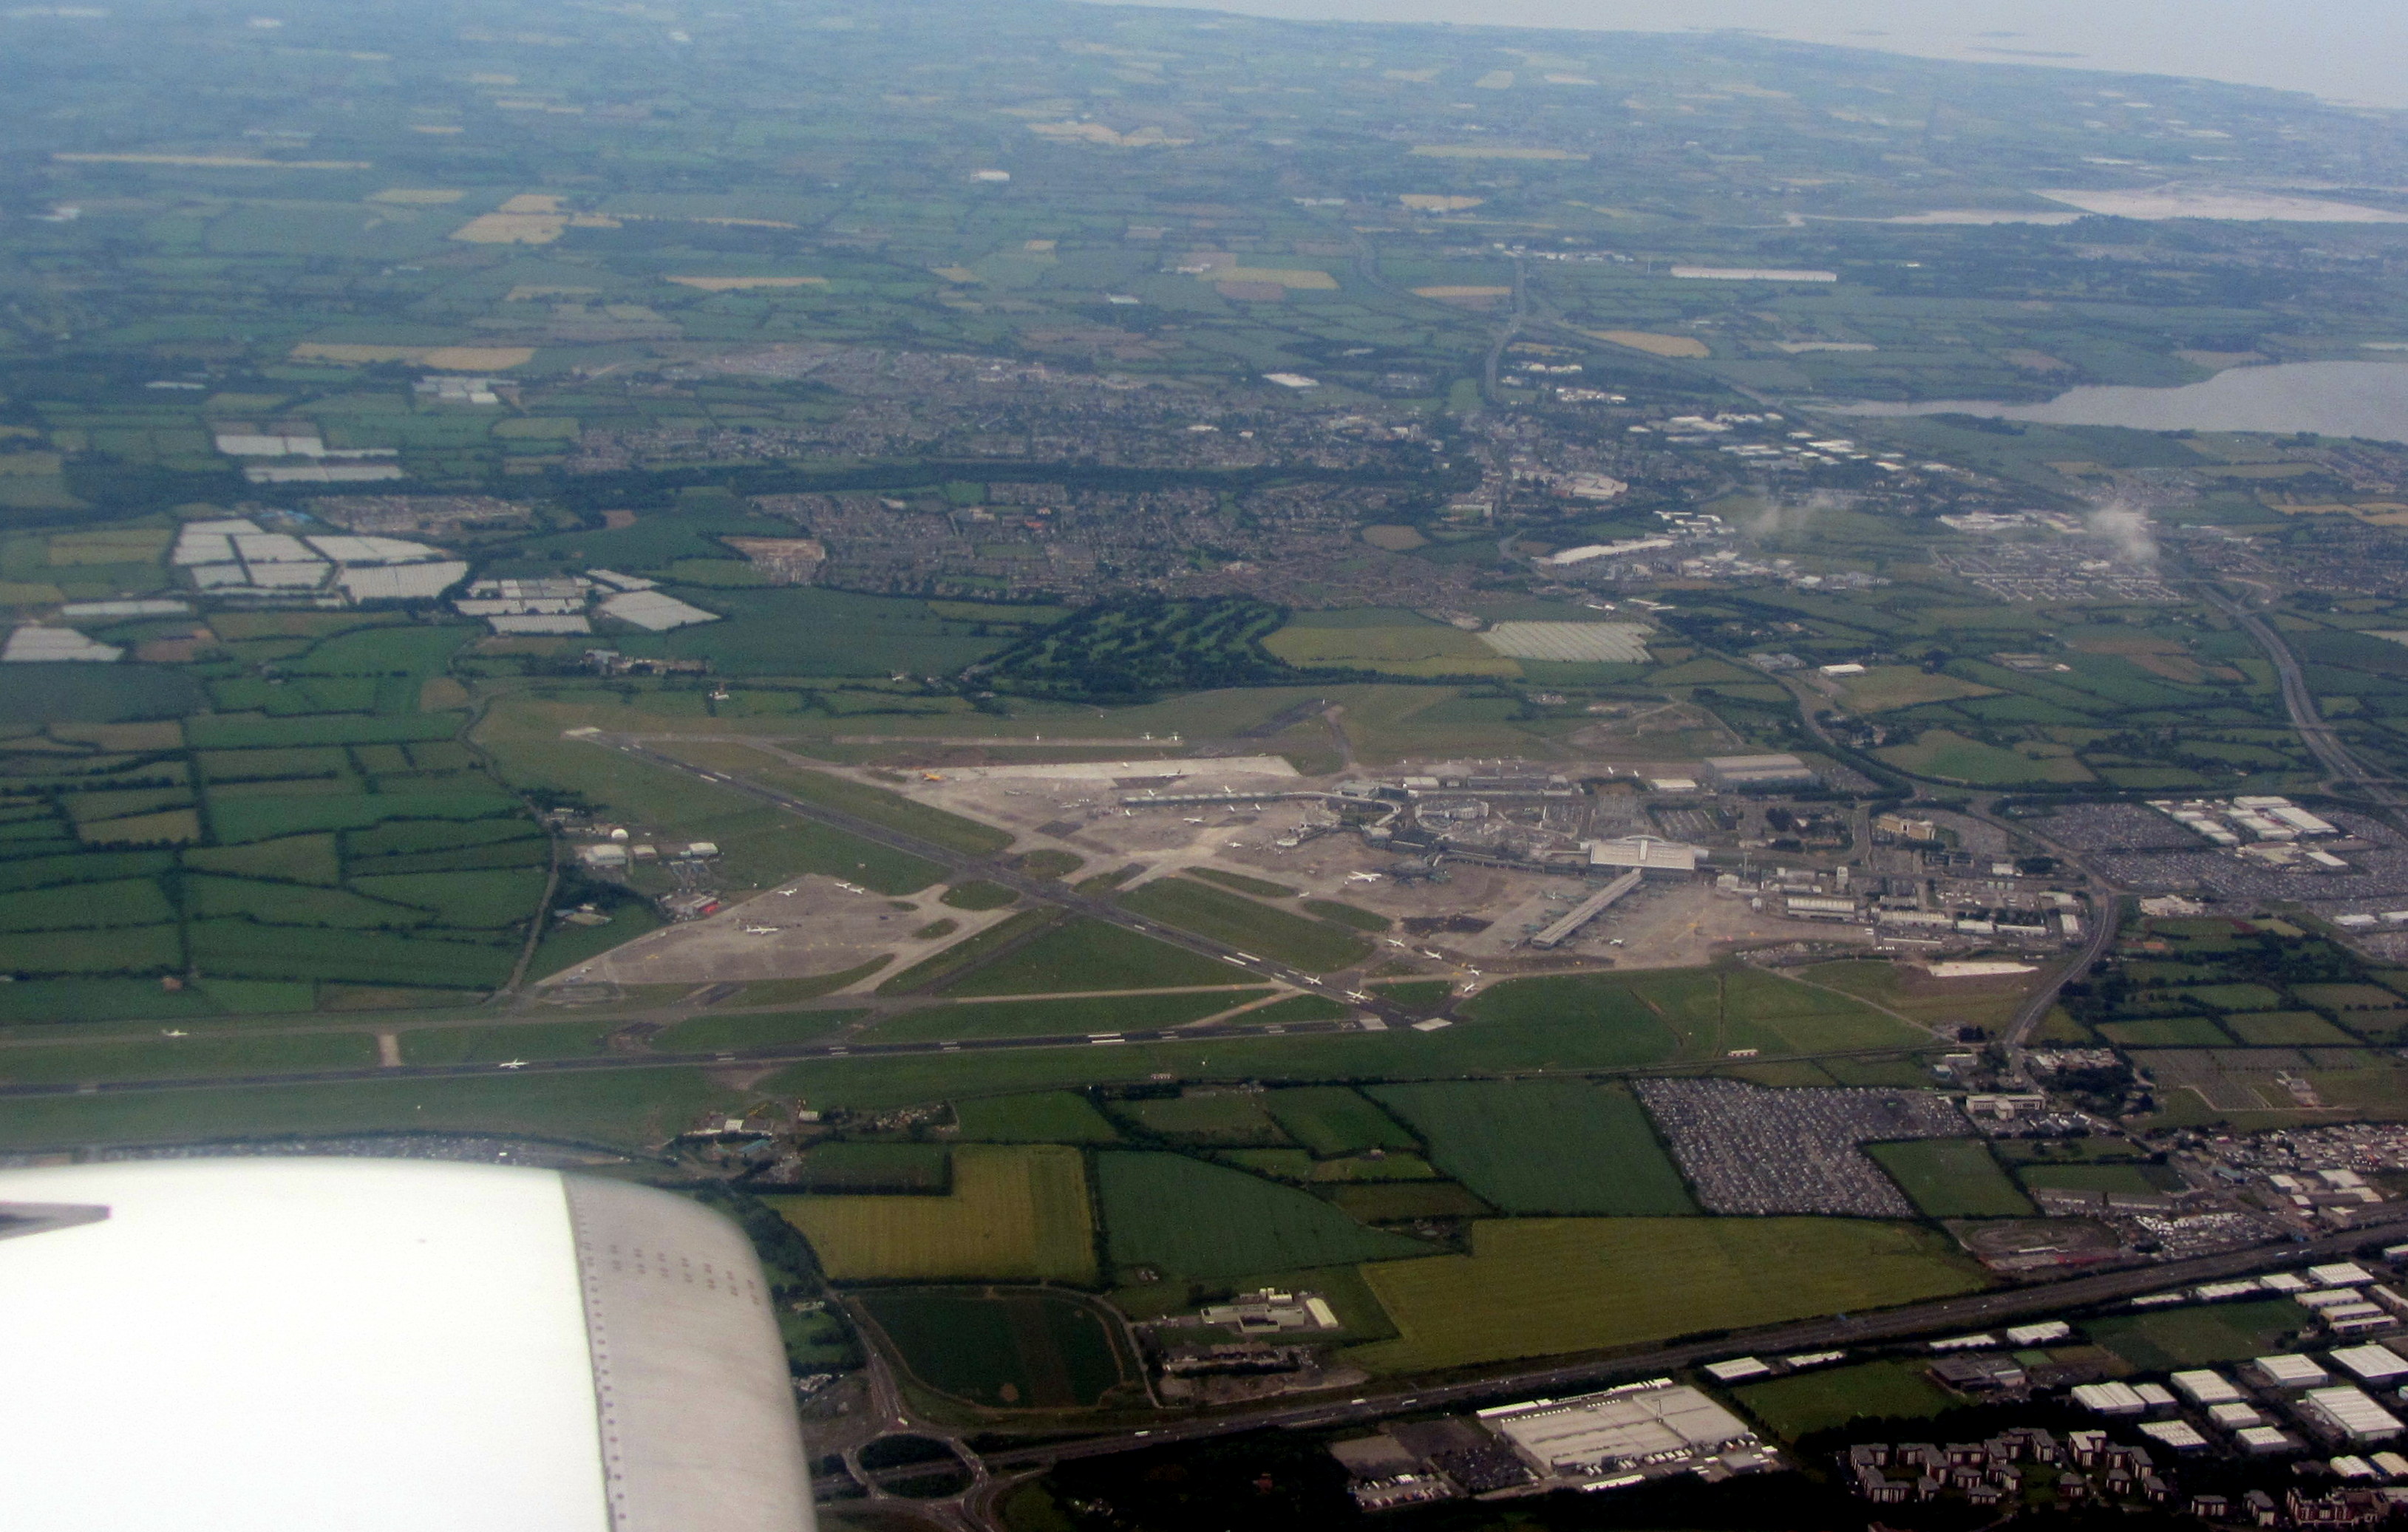 Shortly after take=off: Dublin Airport and its two runways 10/28 and 16/34